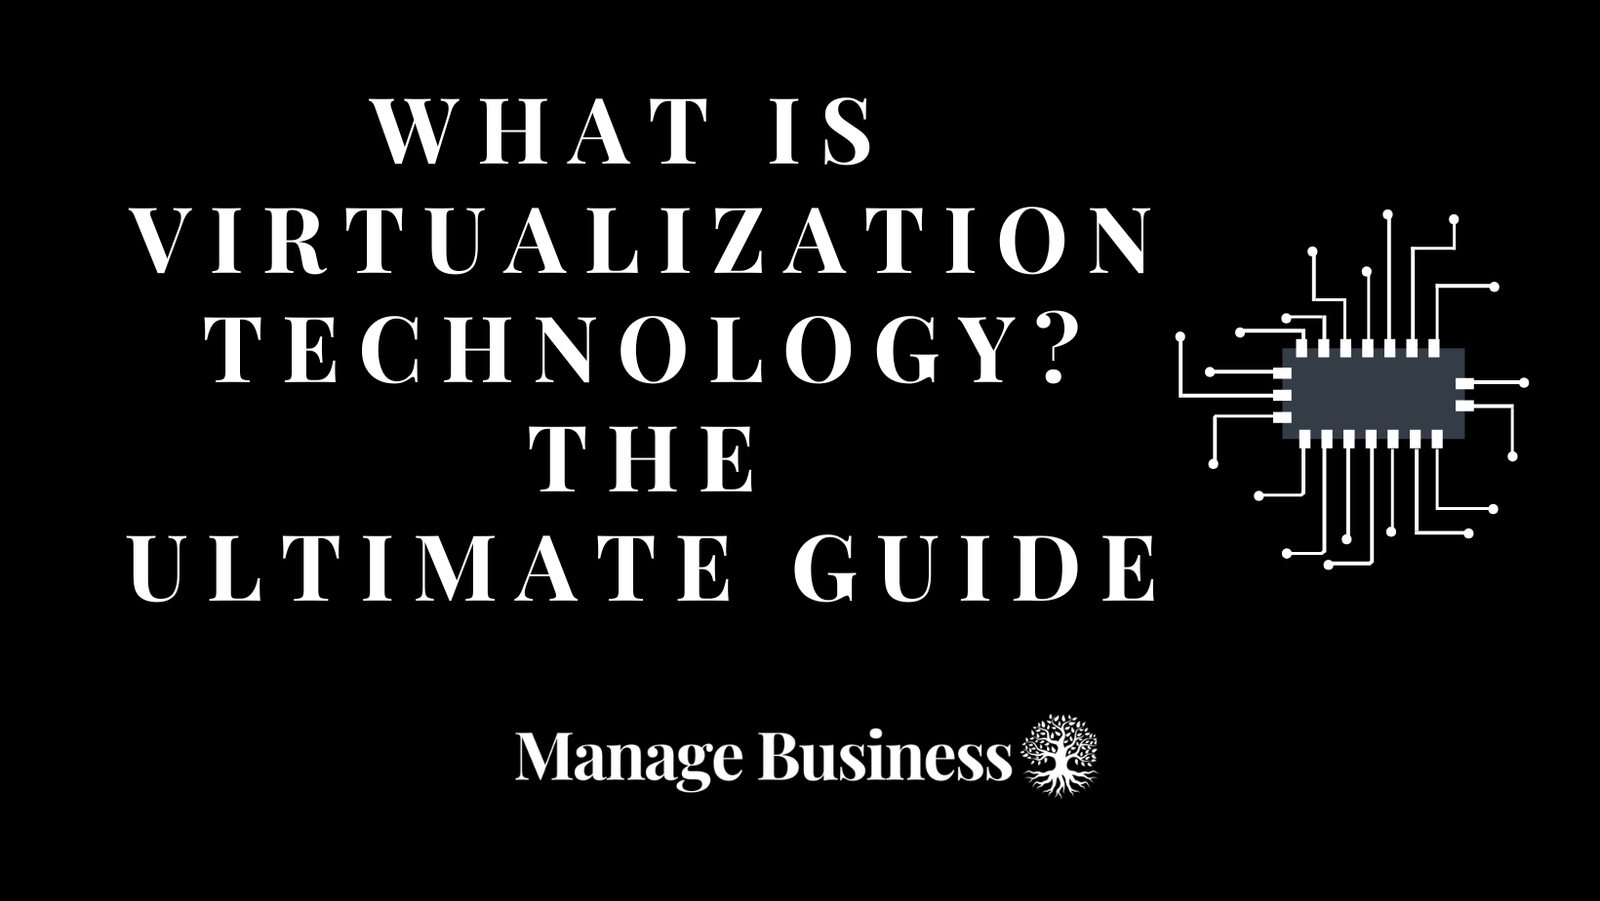 What is virtualization technology - the ultimate guide